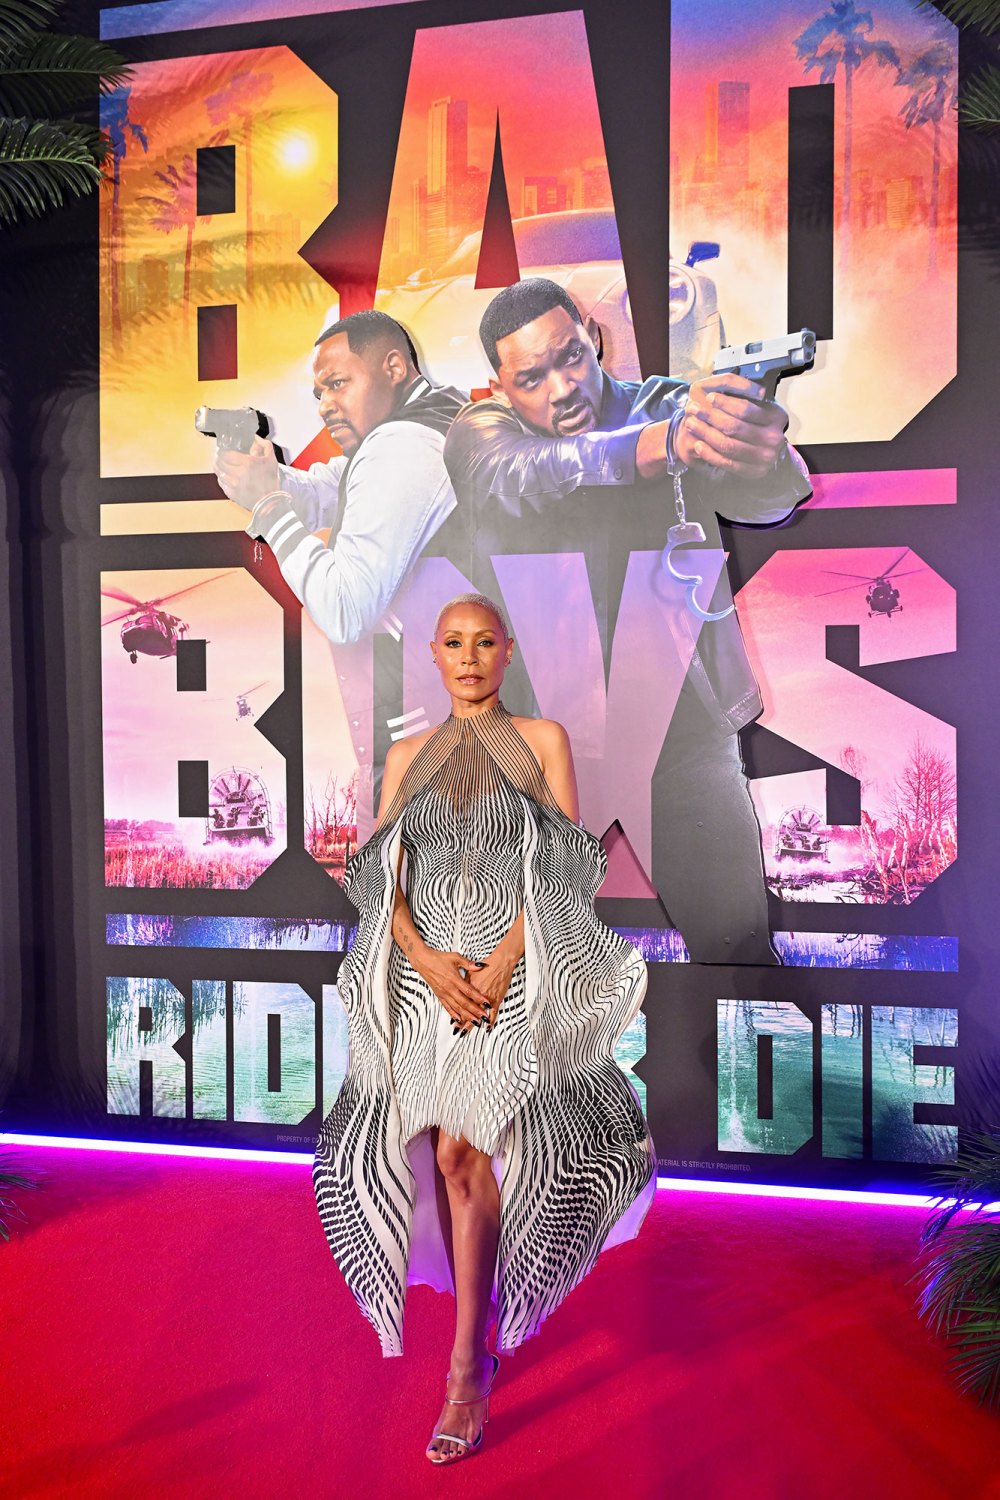 Jada Pinkett Smith and Will Smith Pose Separately at Bad Boys Ride or Die Screening in Dubai 2